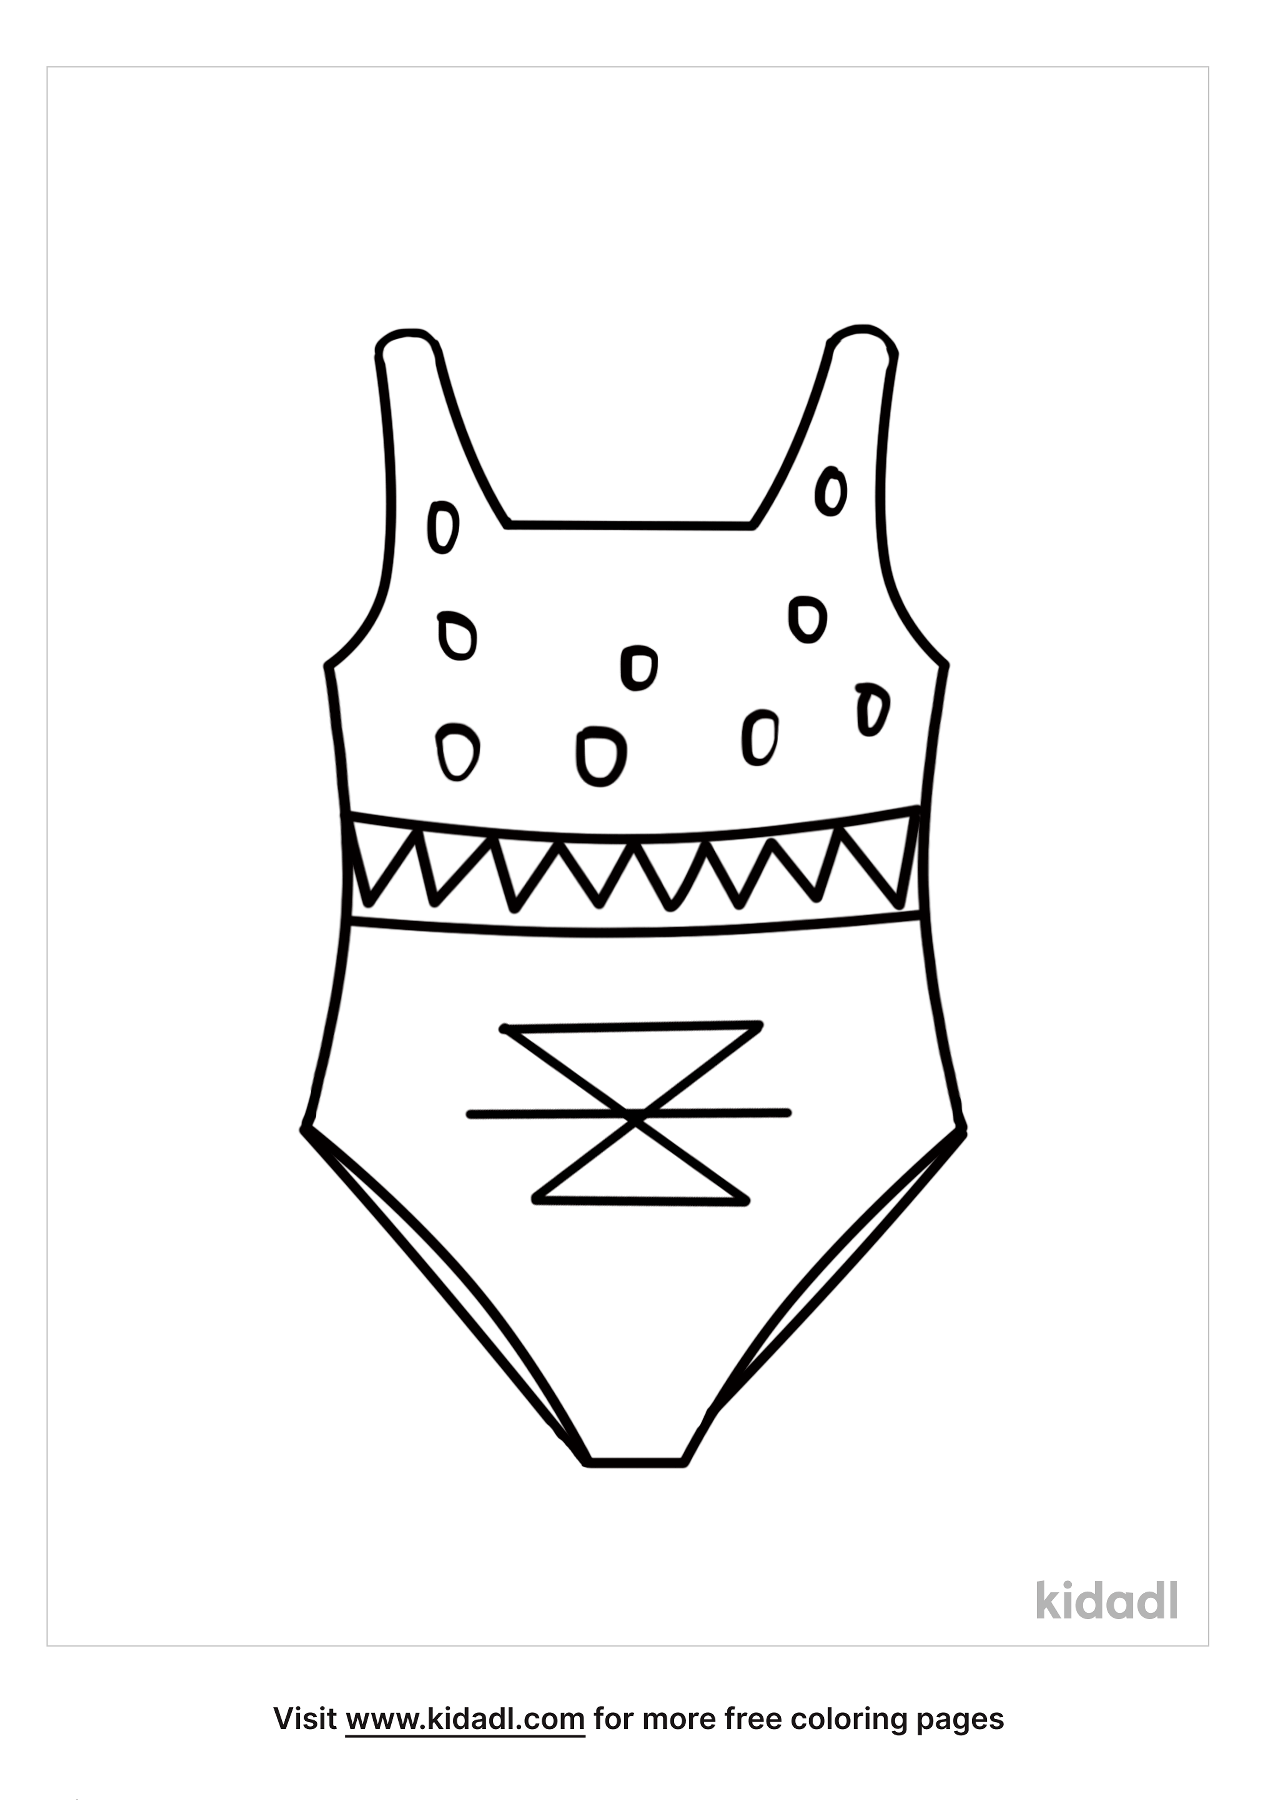 Bathing Suit Coloring Page. Free Fashion And Beauty Coloring Page